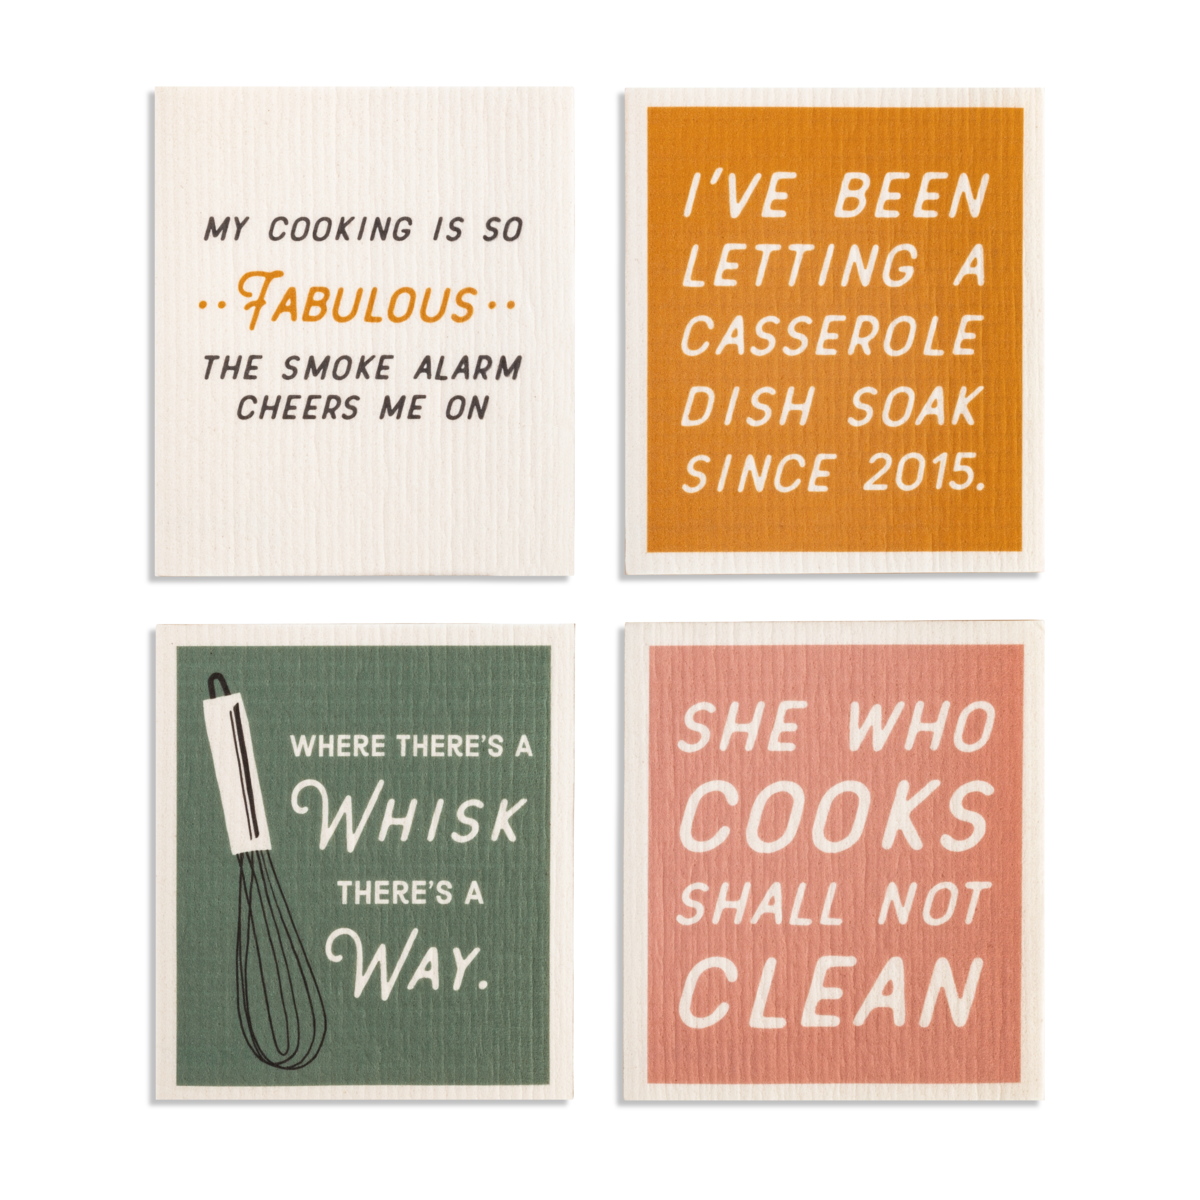 Assorted Biodegradable Dish Cloths